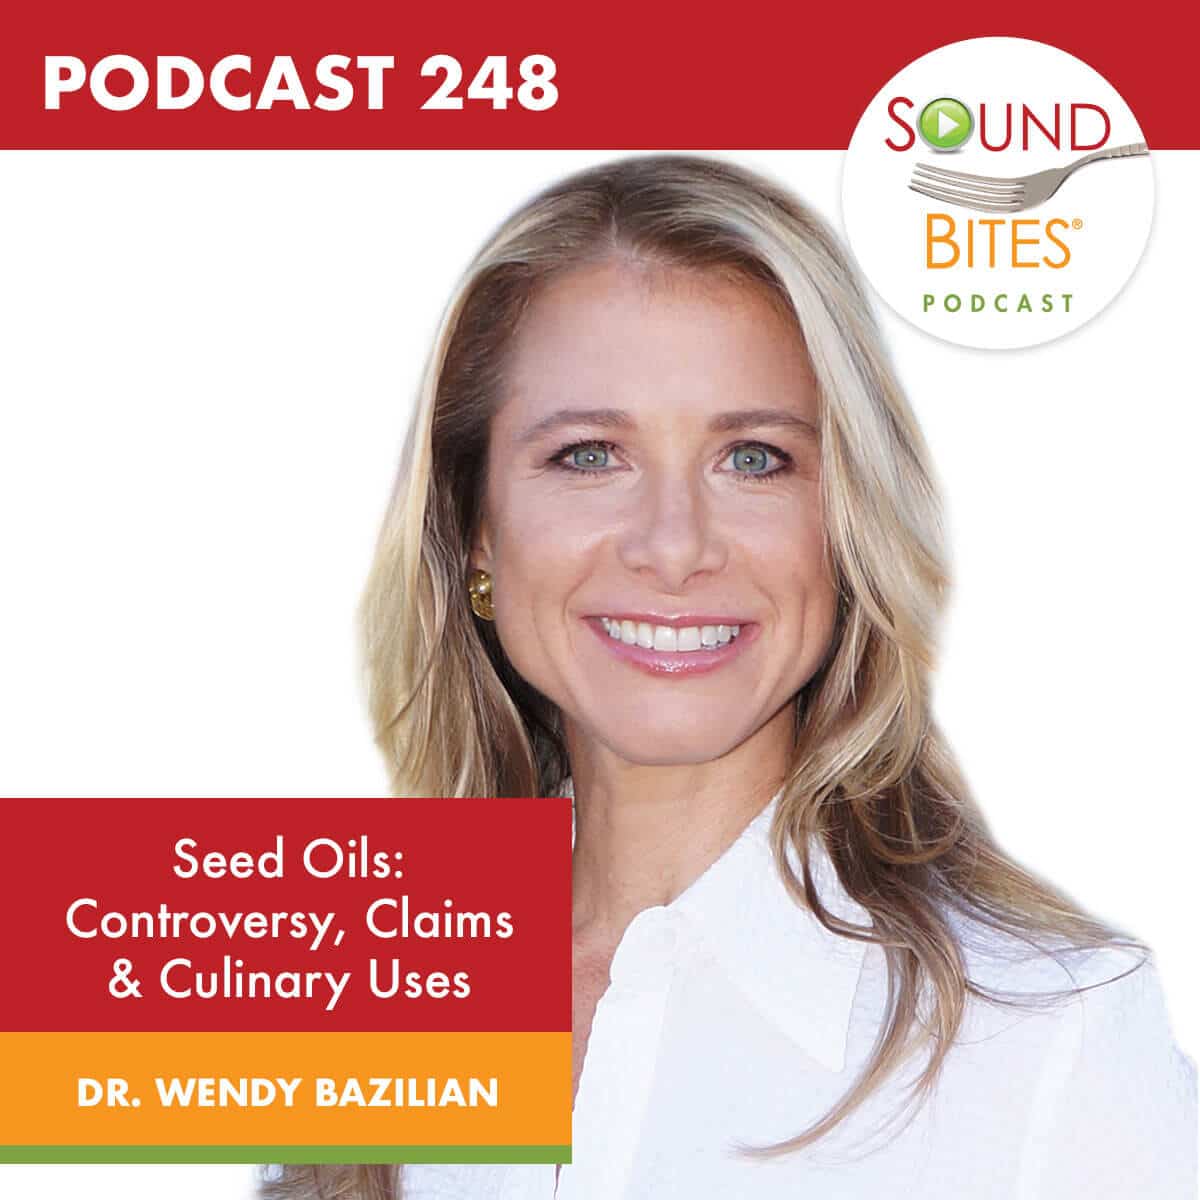 Podcast Episode 248: Seed Oils: Controversy, Claims & Culinary Uses – Dr. Wendy Bazilian